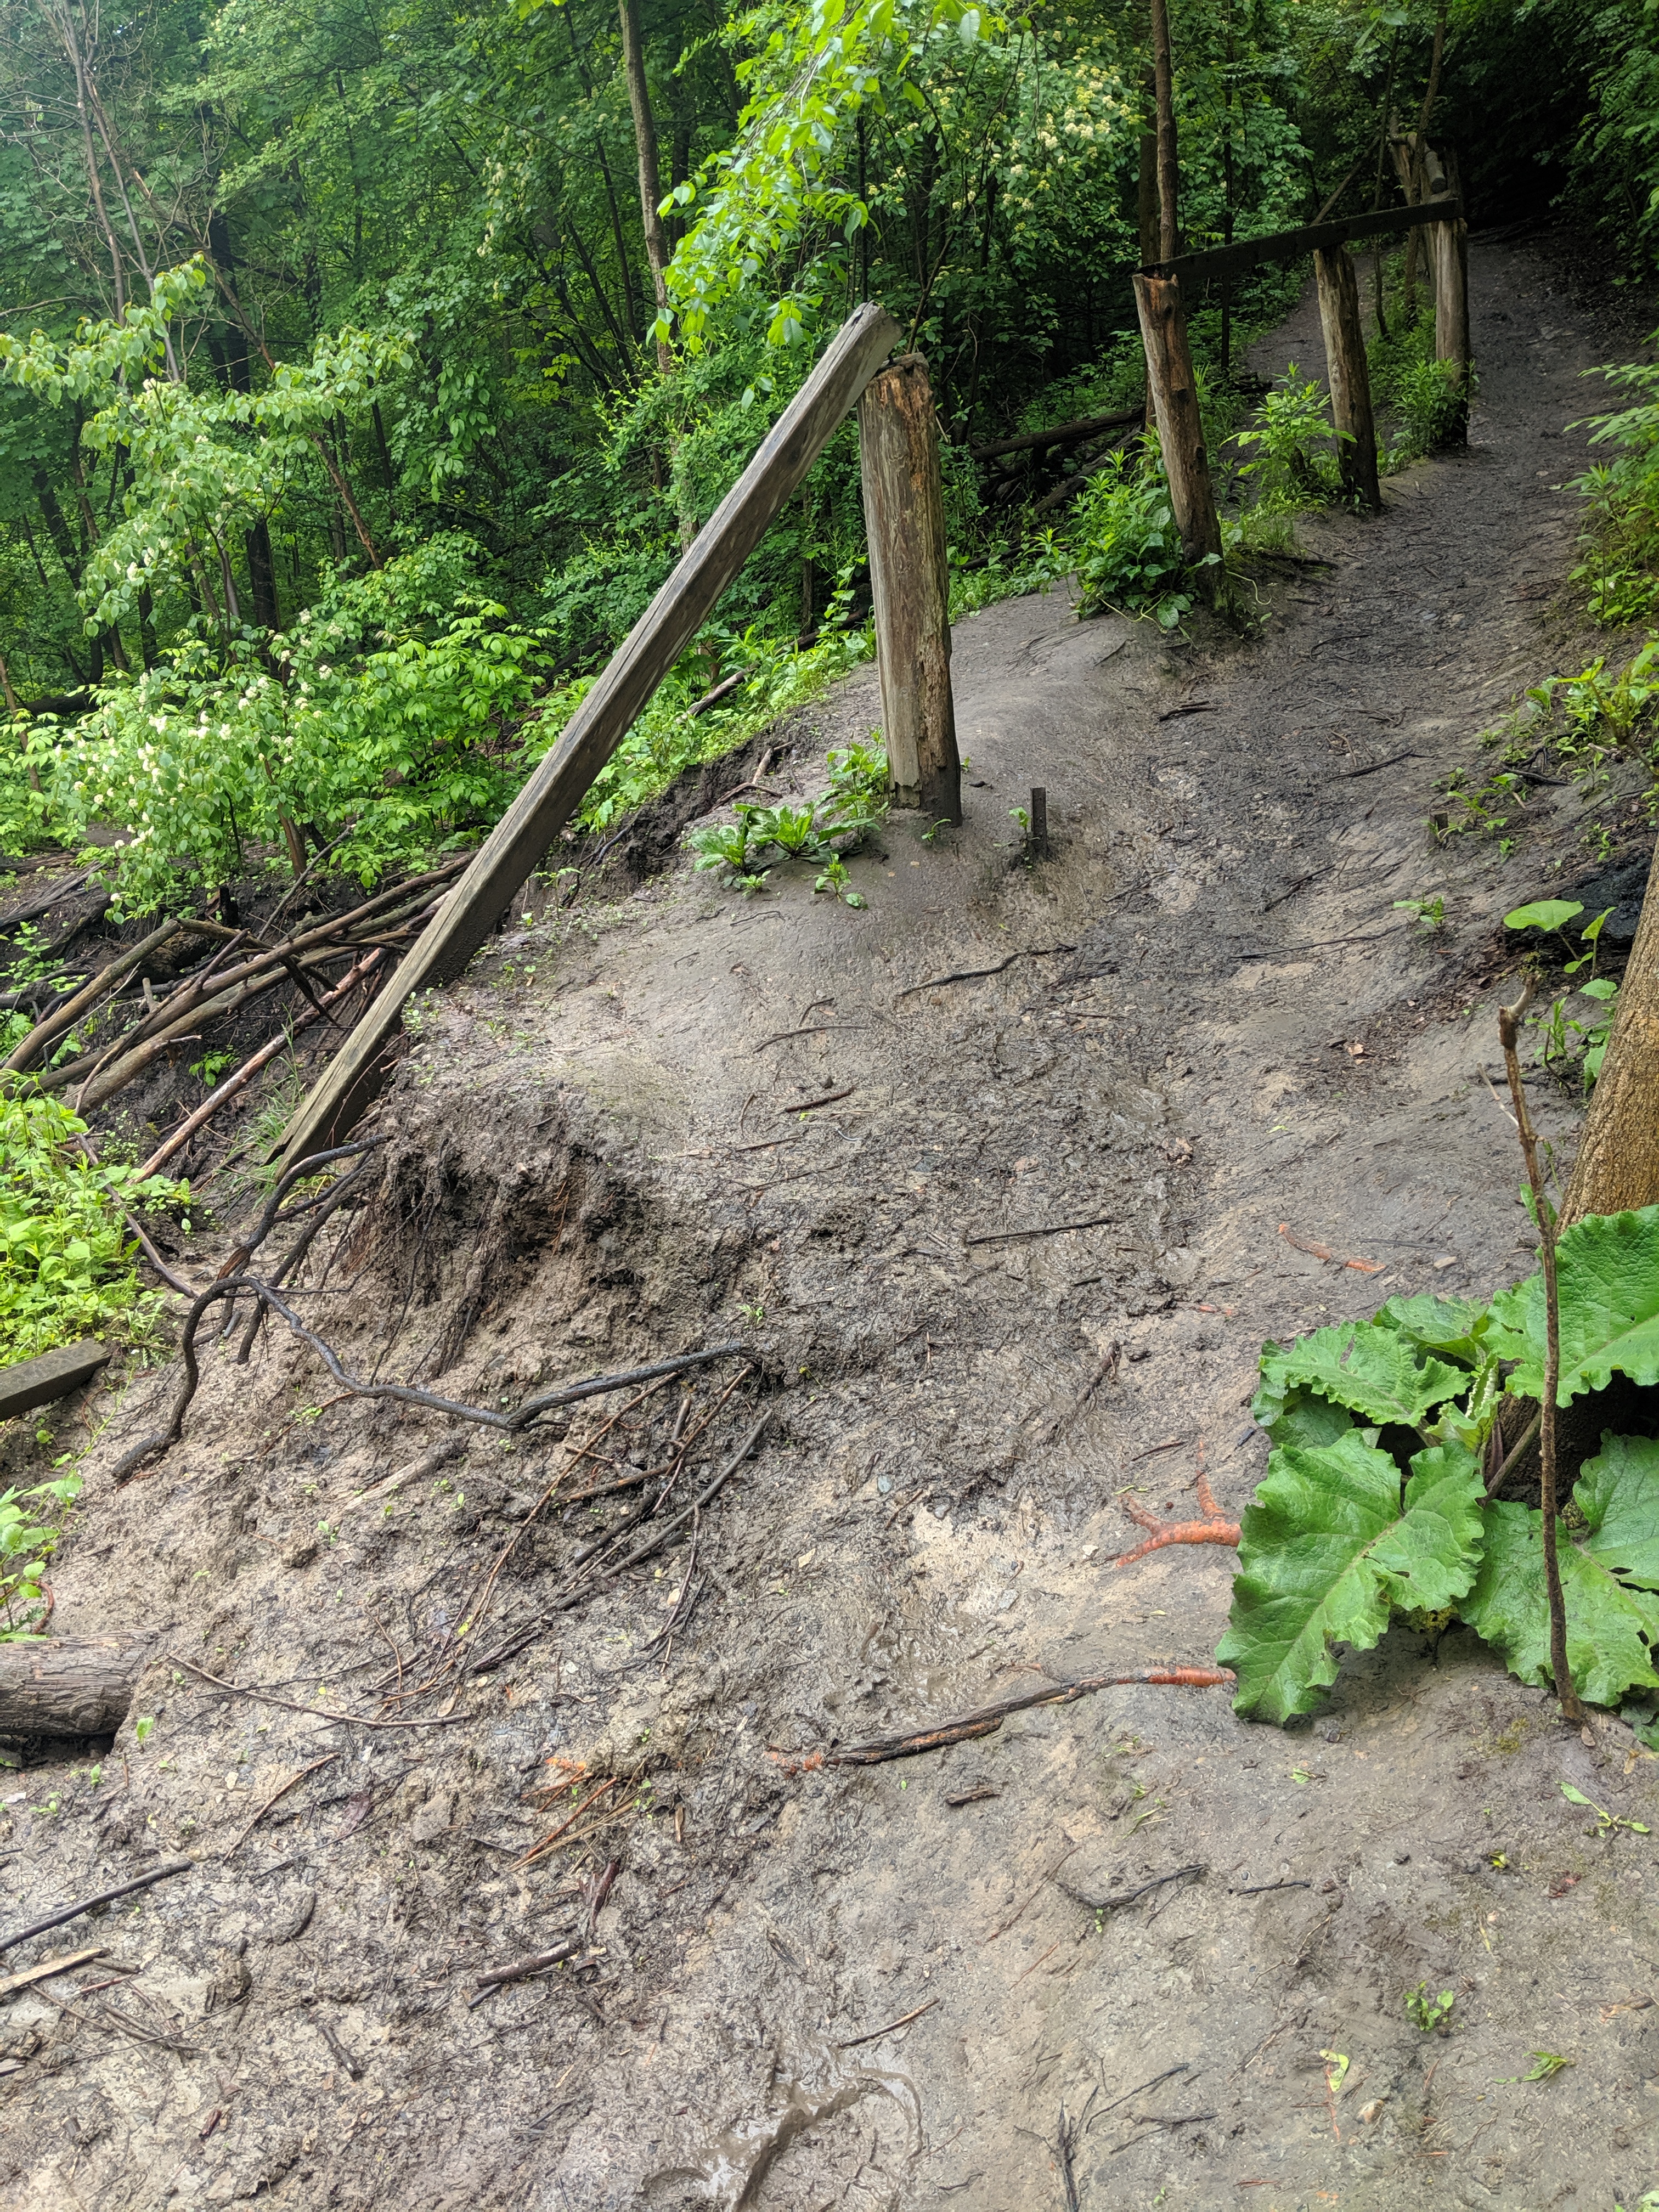 Toe erosion along the slope next to the outflanked channel has impacted a pedestrian trail and resulted in a public safety concern. Source: TRCA, 2019